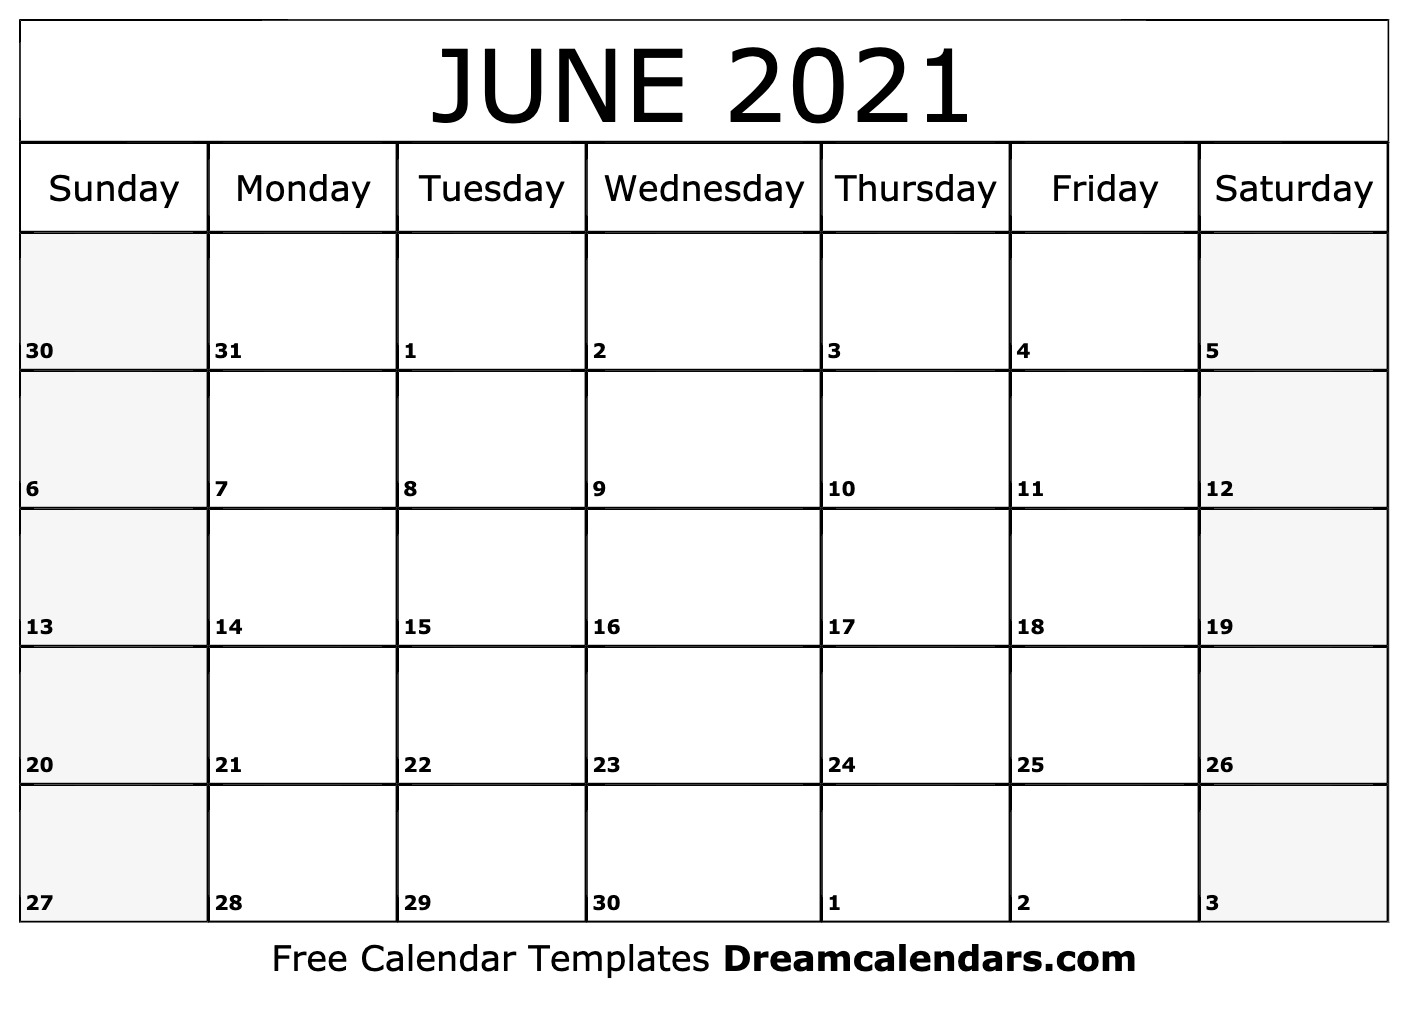 June 2021 Calendar Free Printable With Holidays And Observances 3882